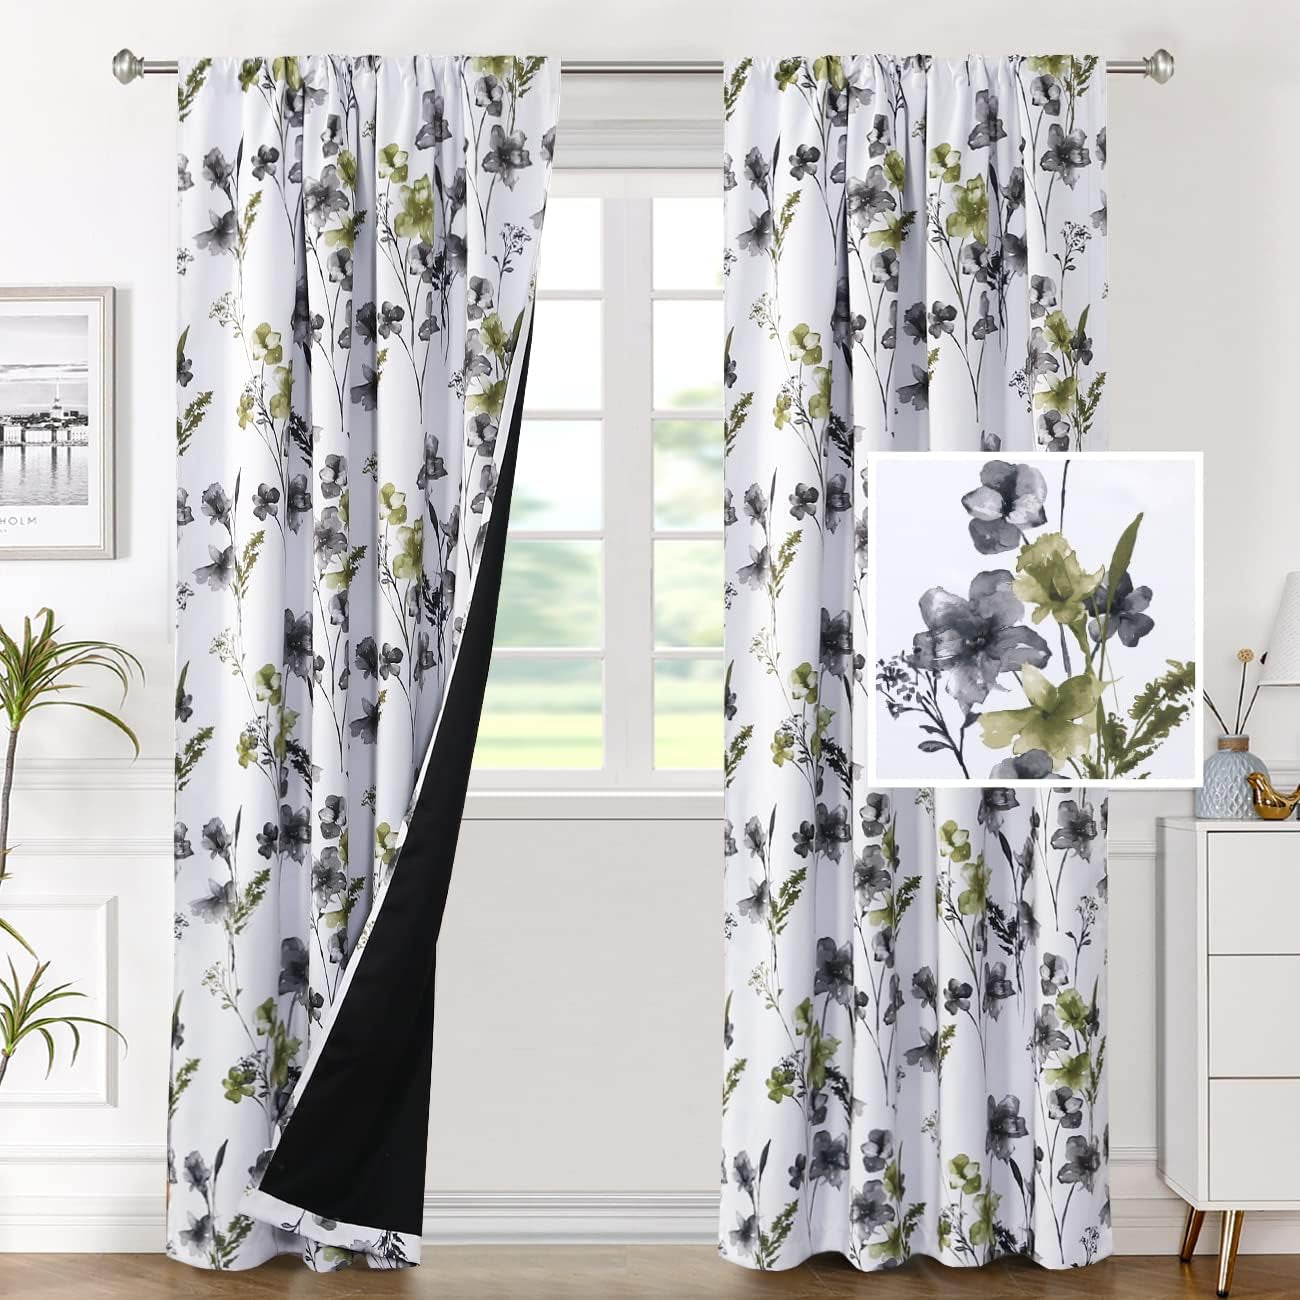 H.VERSAILTEX 100% Blackout Curtains for Bedroom Cattleya Floral Printed Drapes 84 Inches Long Leah Floral Pattern Full Light Blocking Drapes with Black Liner Rod Pocket 2 Panels, Navy/Taupe  H.VERSAILTEX Grey/Olive 52"W X 84"L 